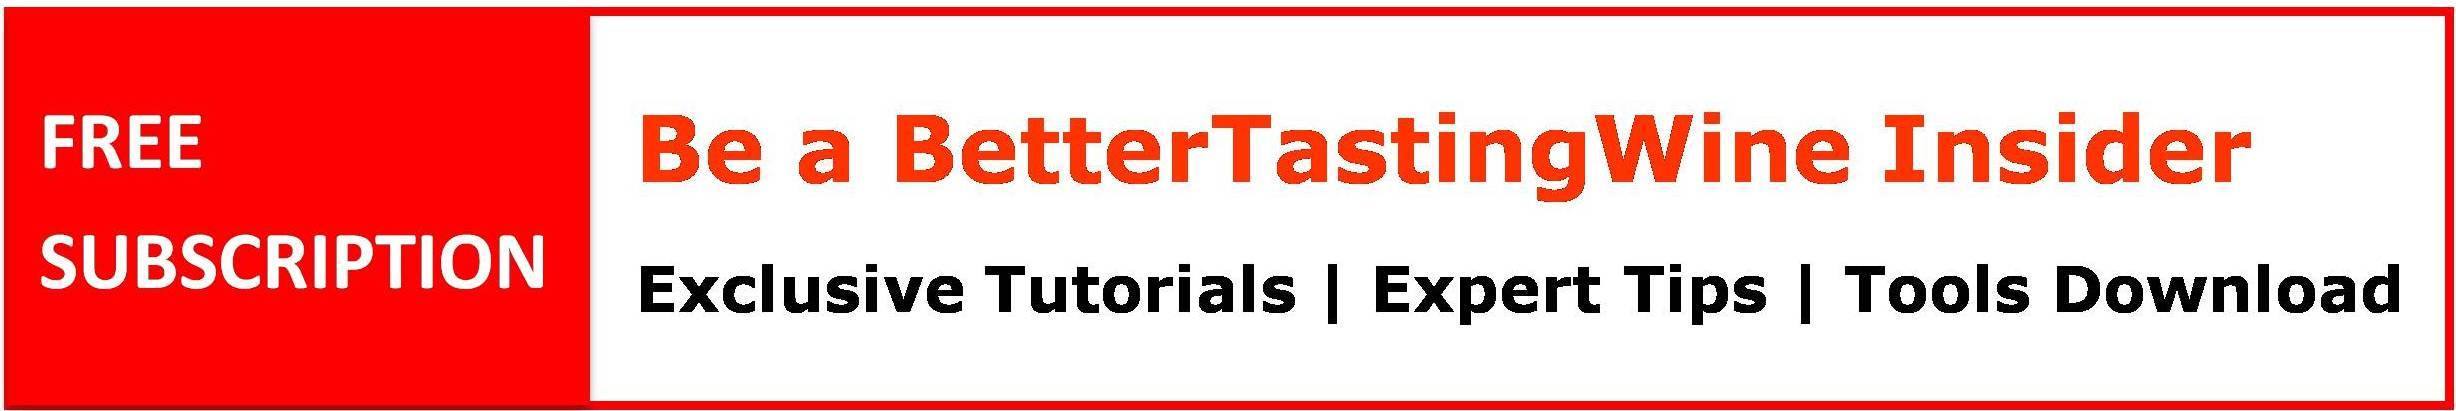 BetterTastingWine Wine Tips and News Subscription